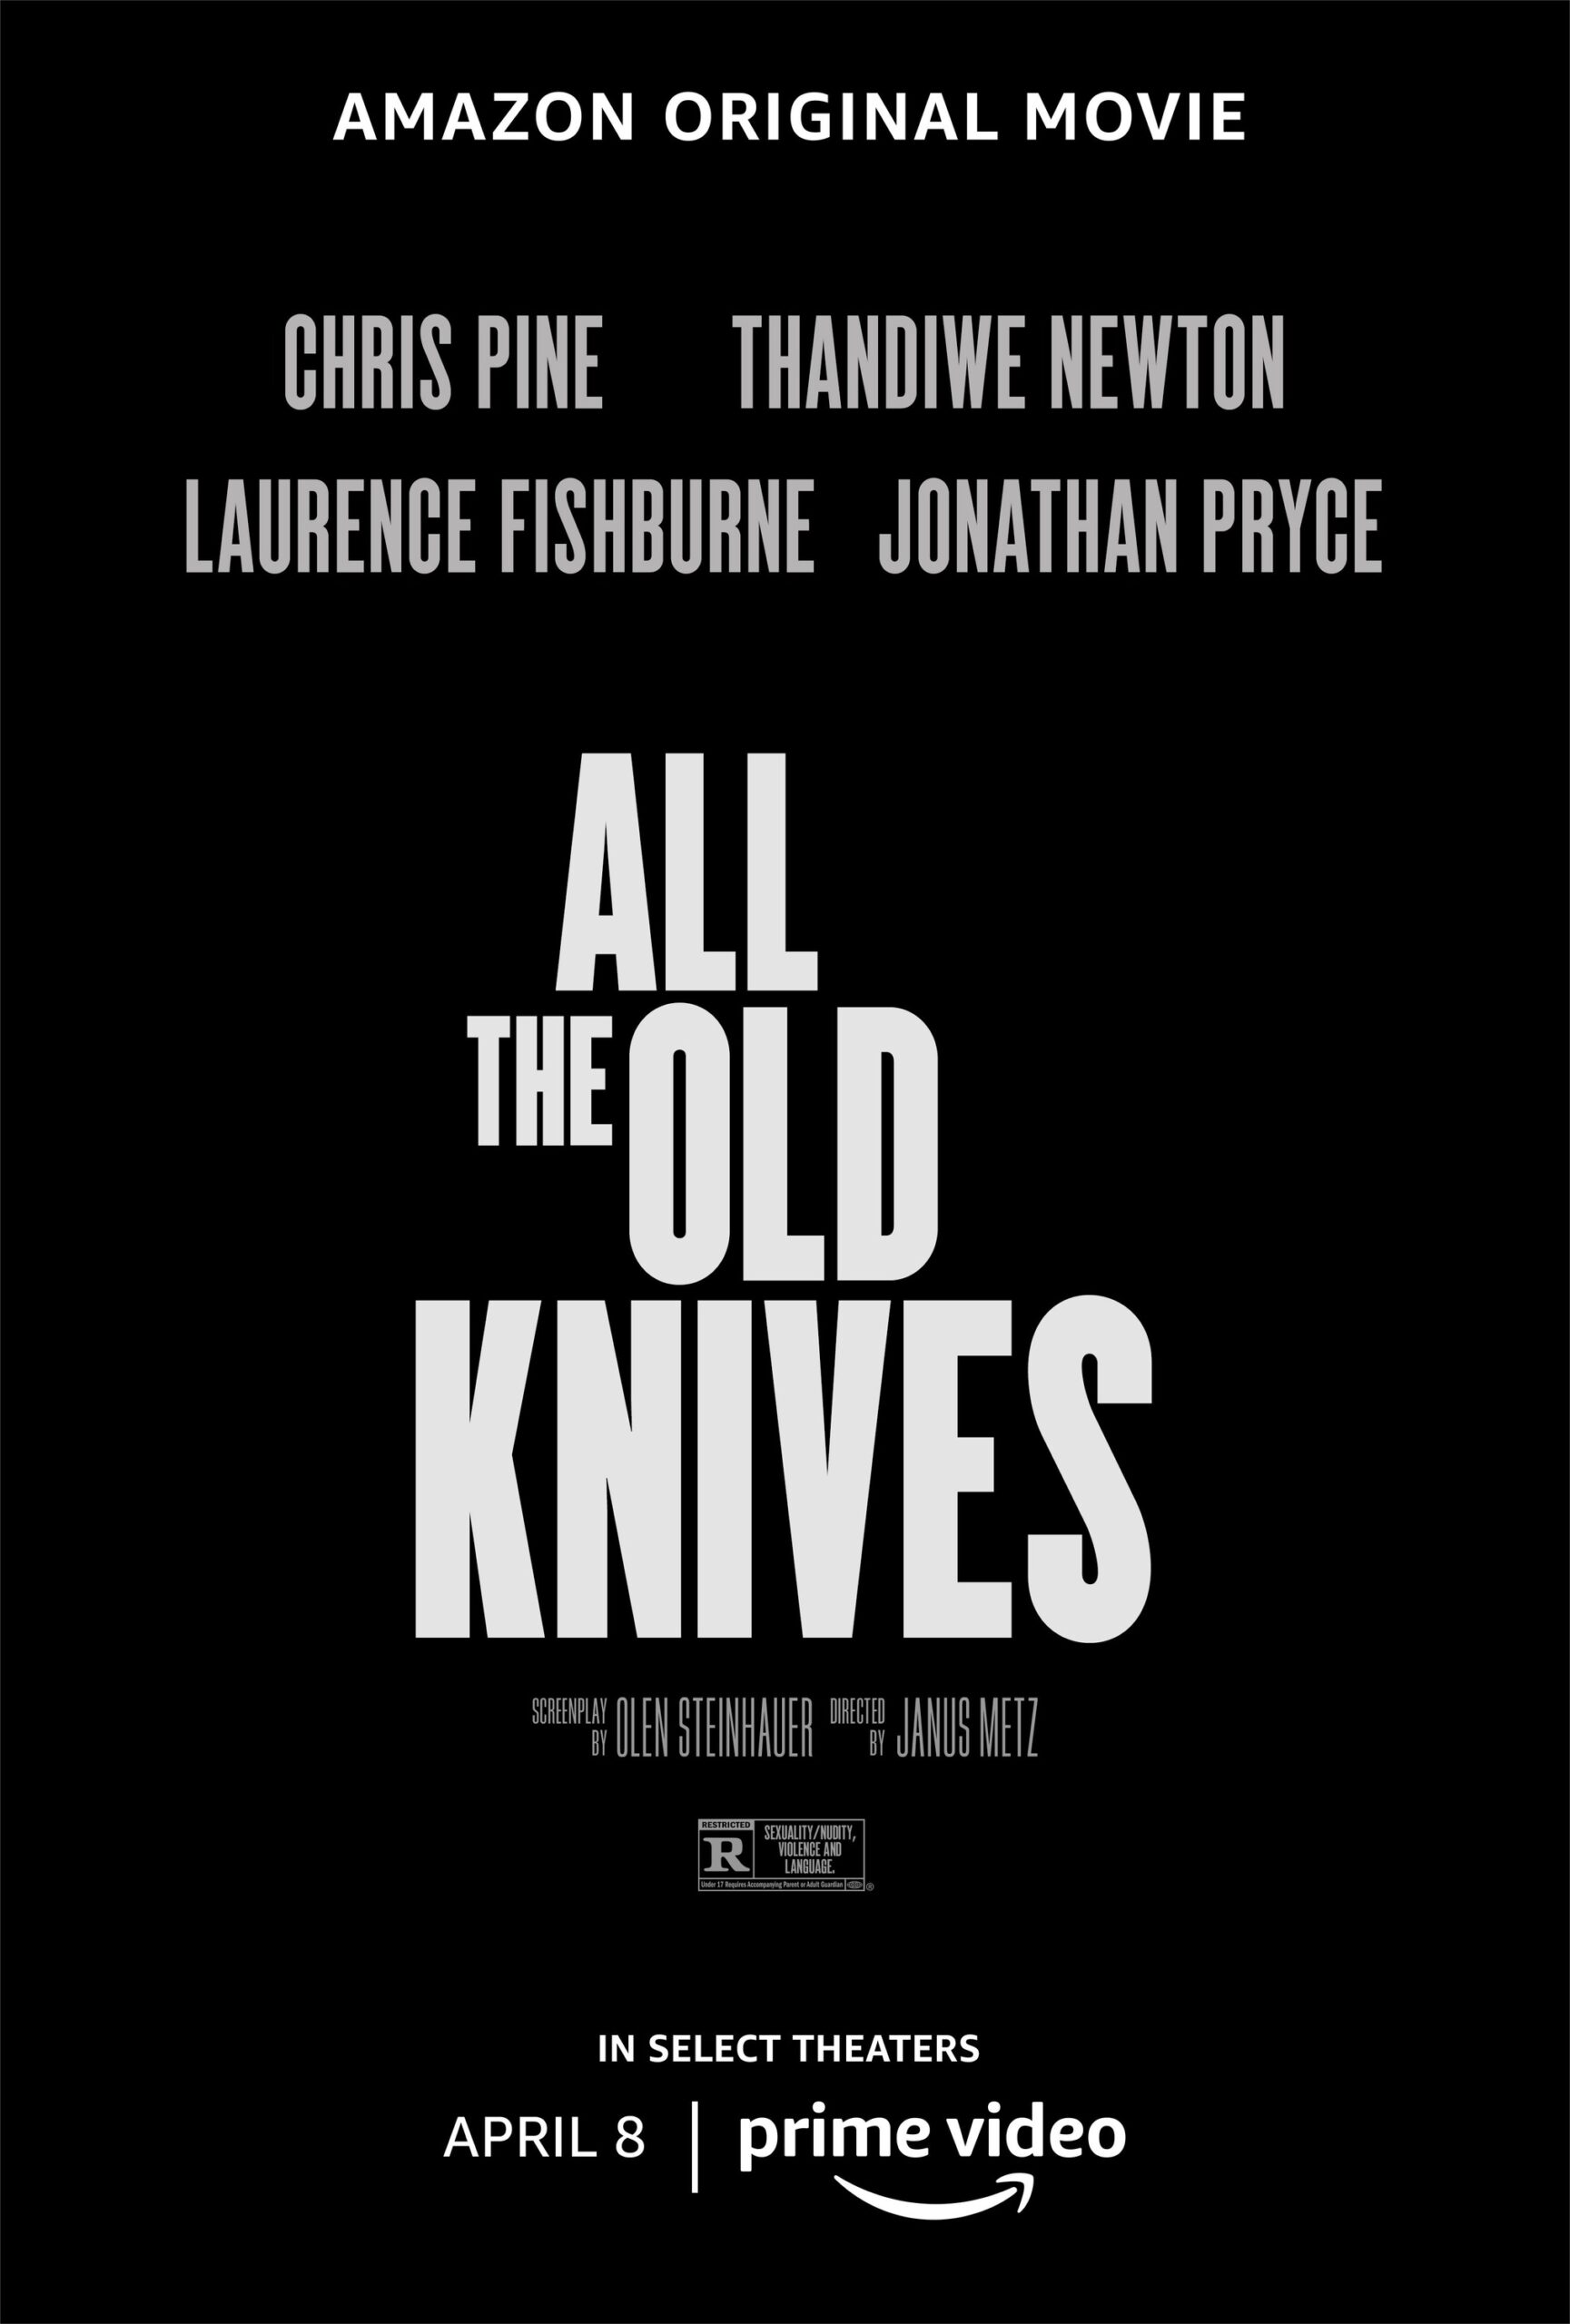 1st Trailer For Amazon Original Movie 'All The Old Knives' Starring Thandiwe Newton & Laurence Fishburne